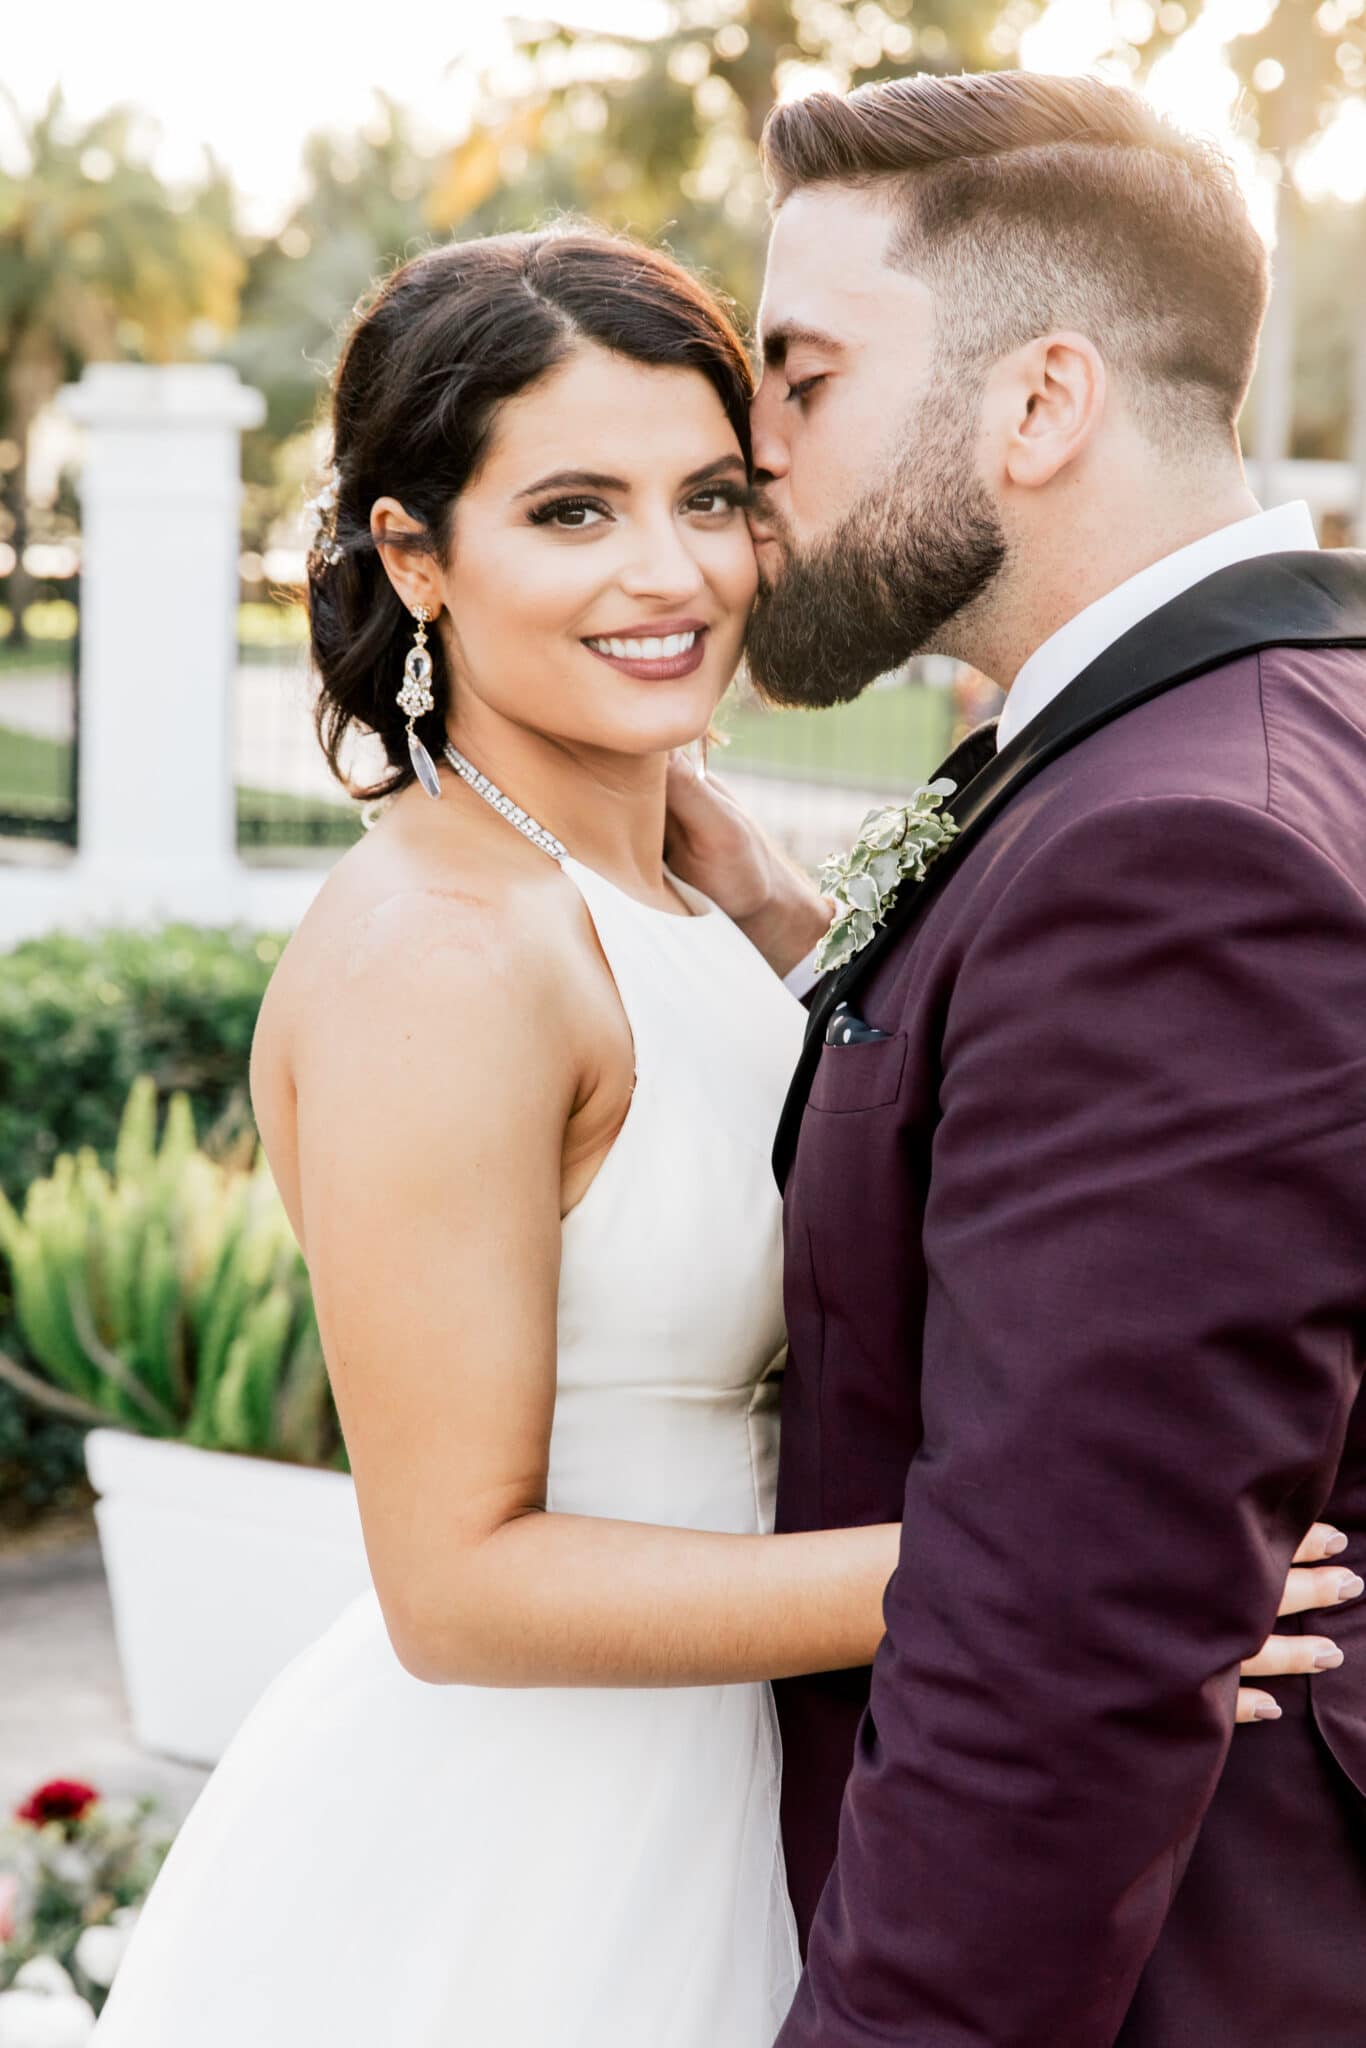 Groom kisses bride as she looks at camera